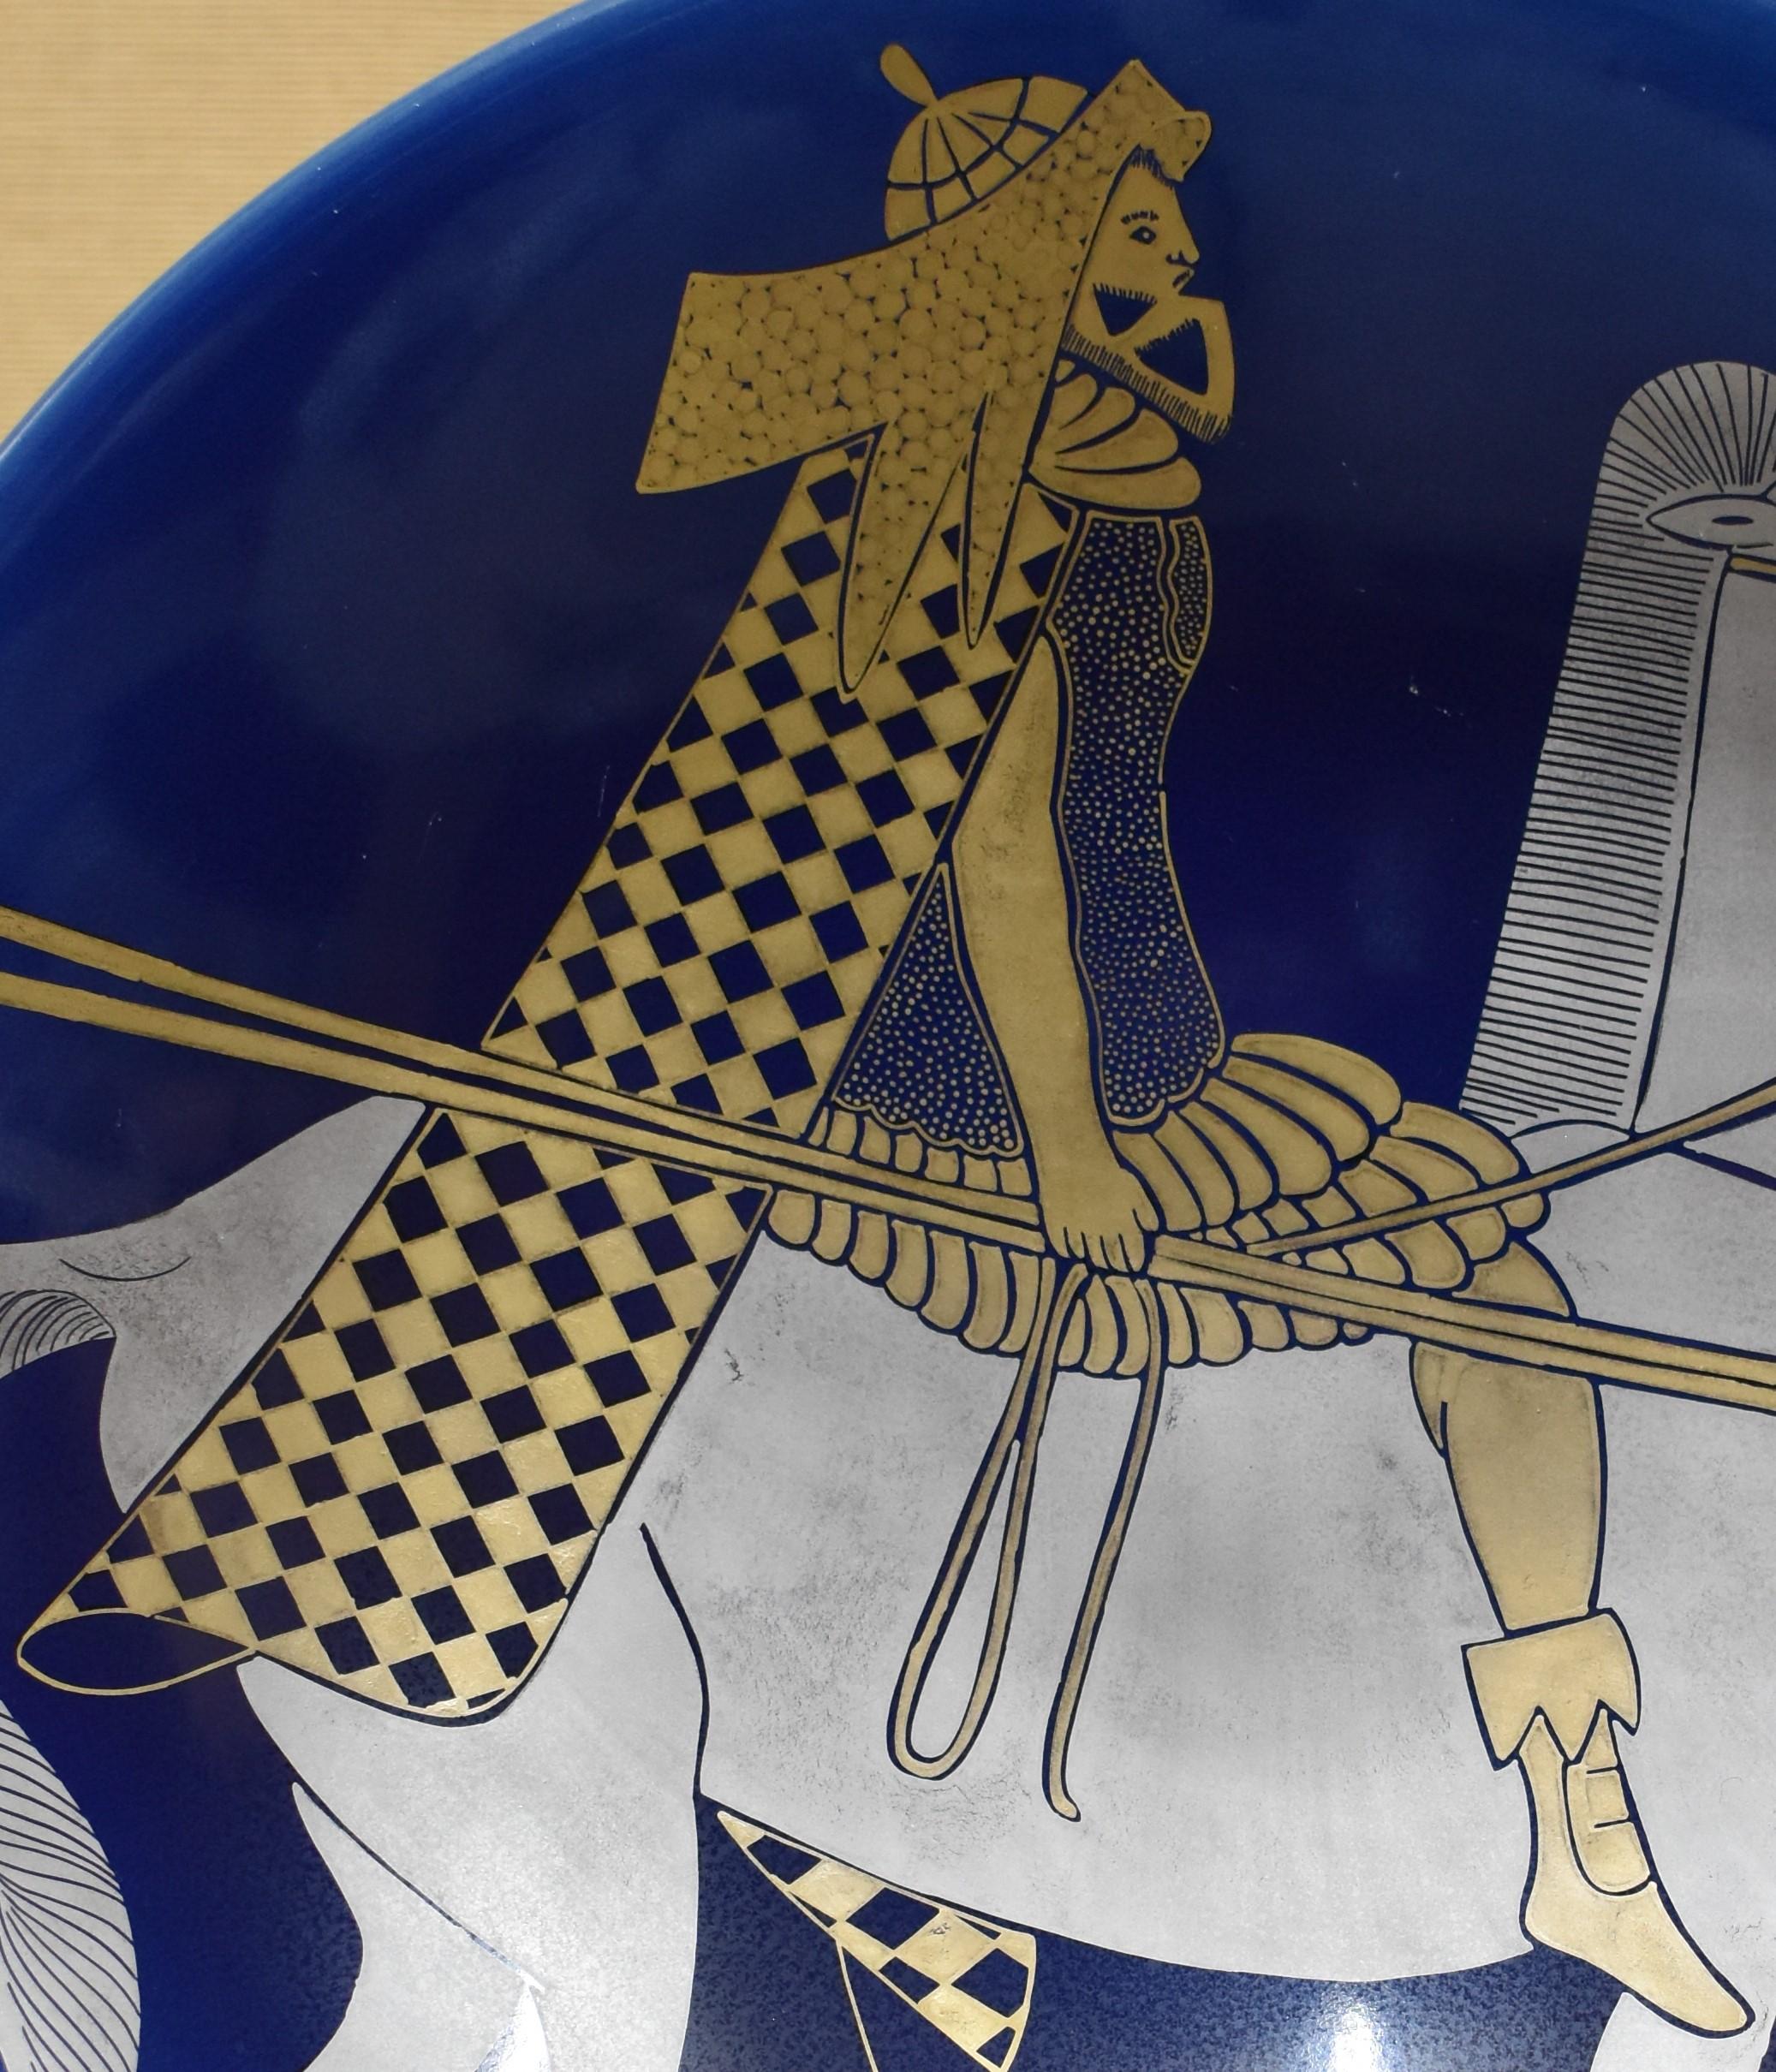 Unique large contemporary Kutani hand-painted porcelain charger, a masterpiece showcasing the artist’s vision of an ancient Persian warrior riding a horse, depicted in platinum and gold against a beautiful deep blue.

The creator of this work is a